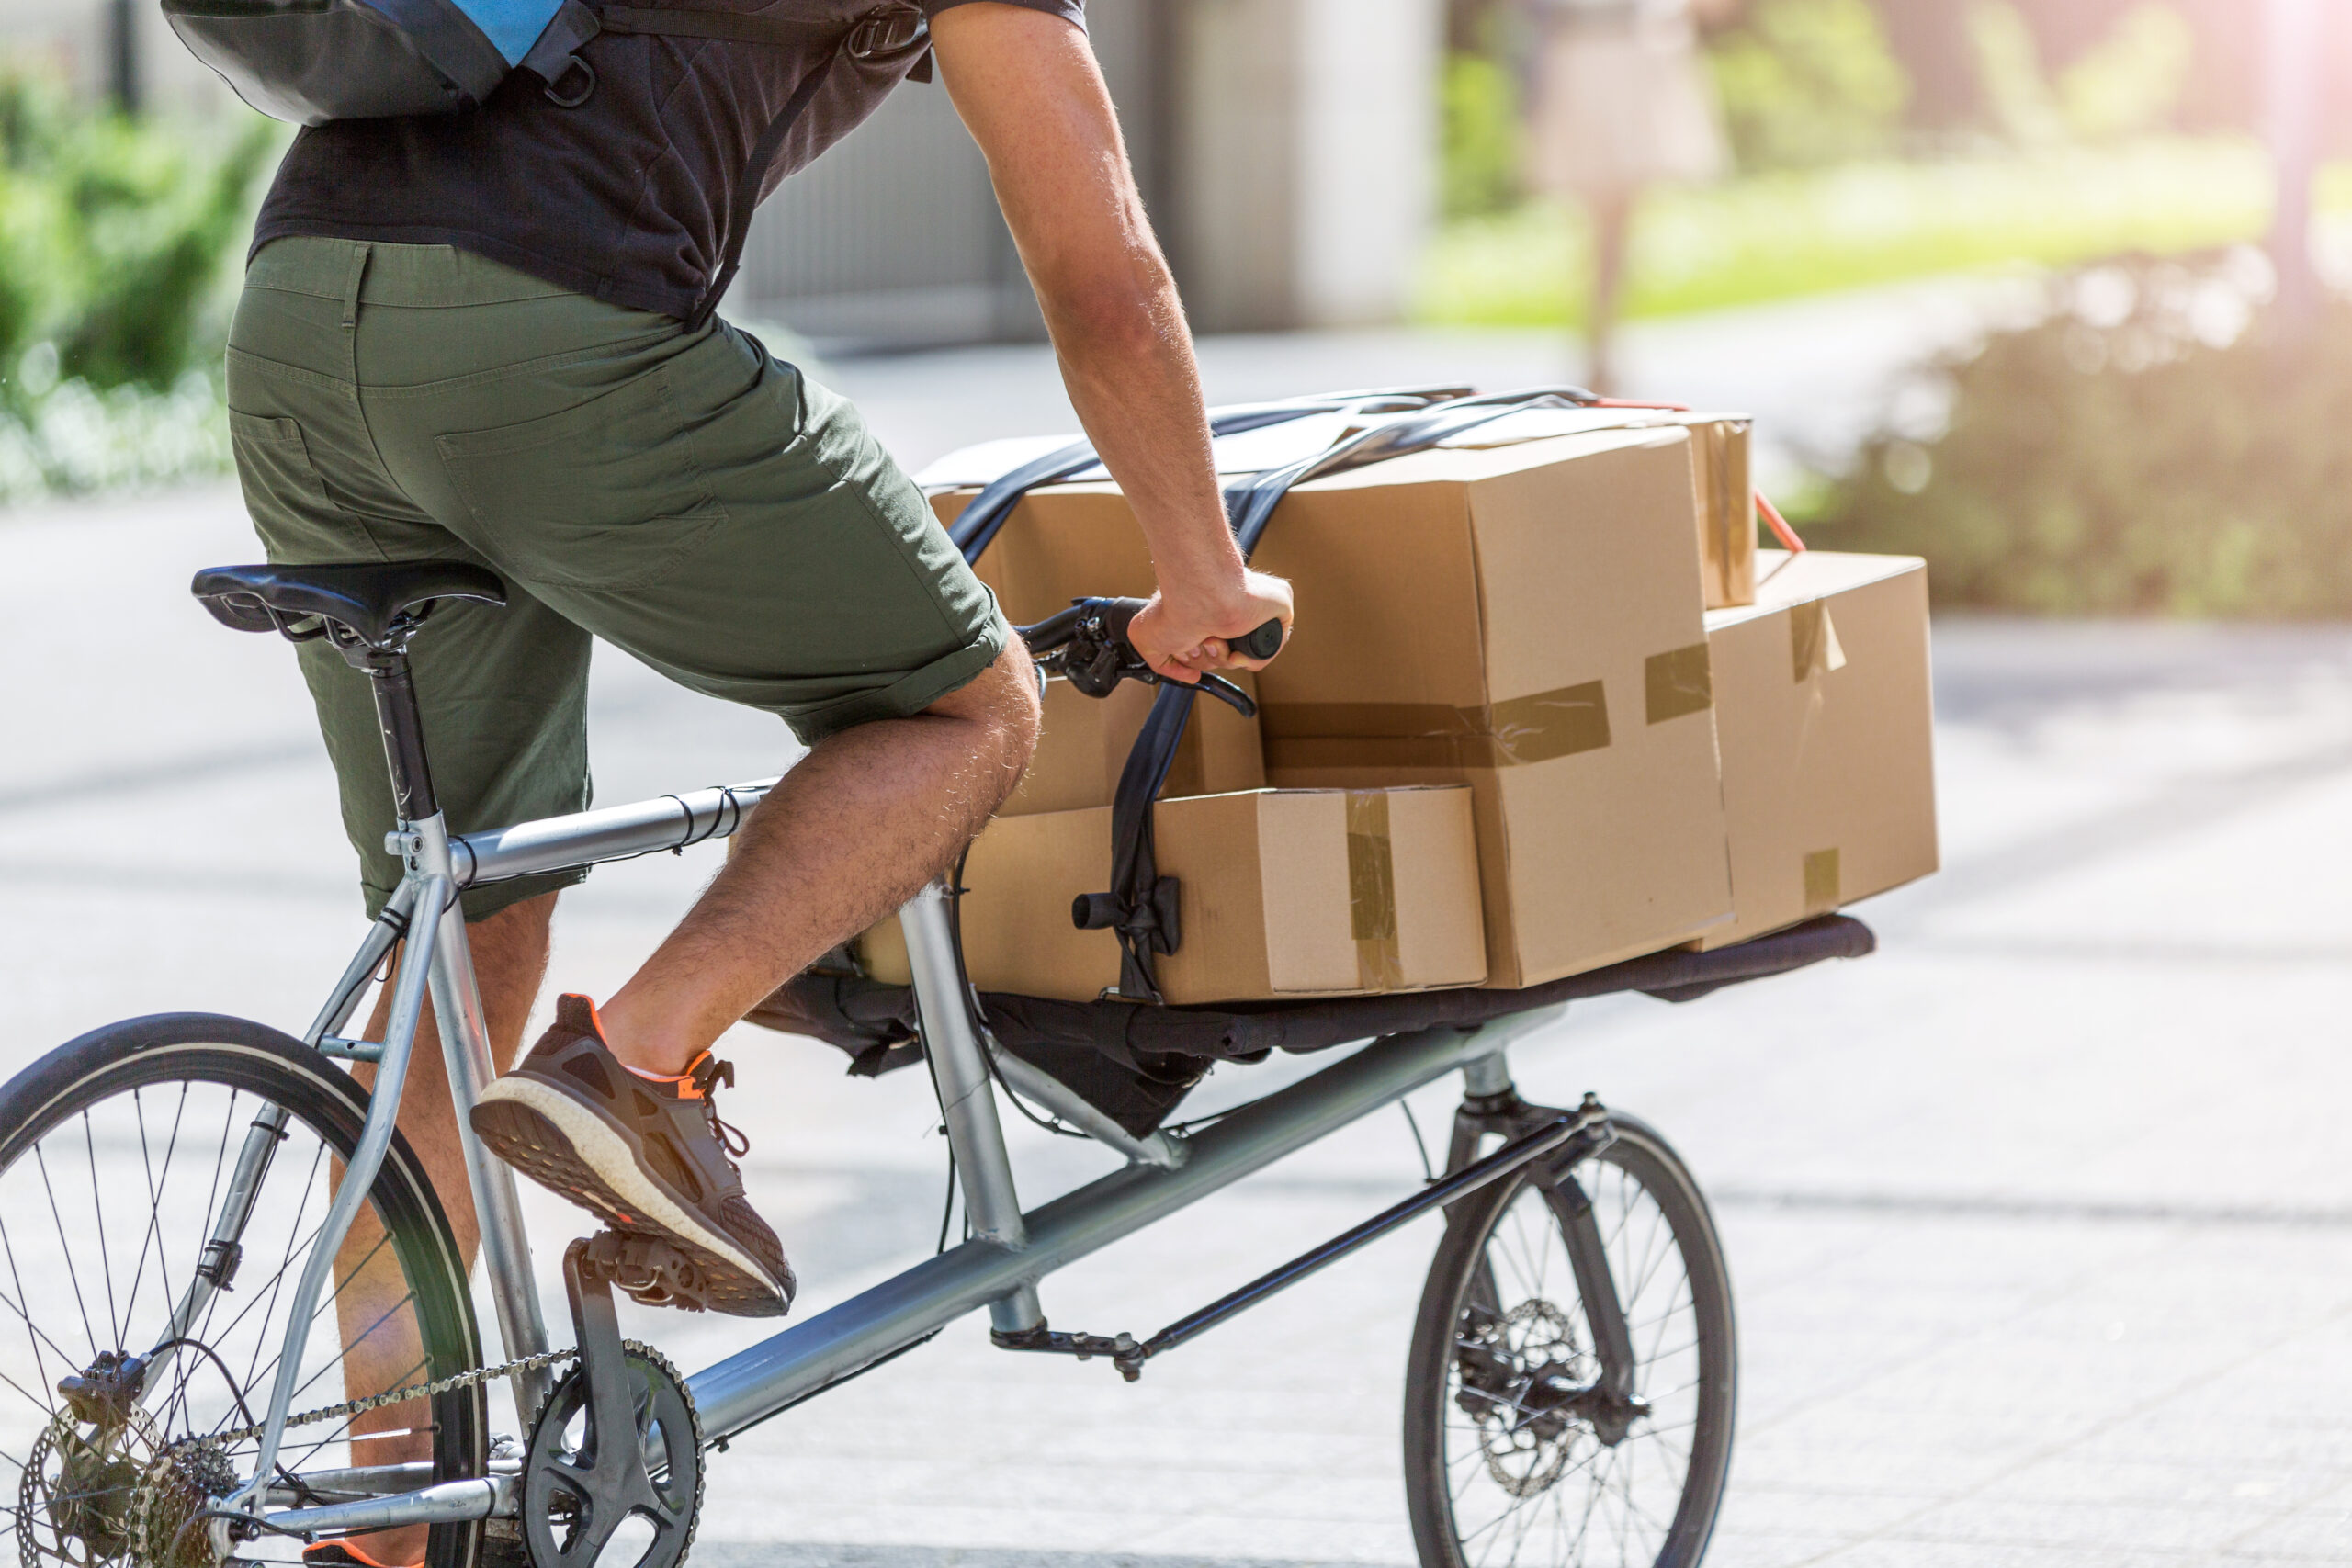 Couriers and delivery drivers now part of UK communities, study says